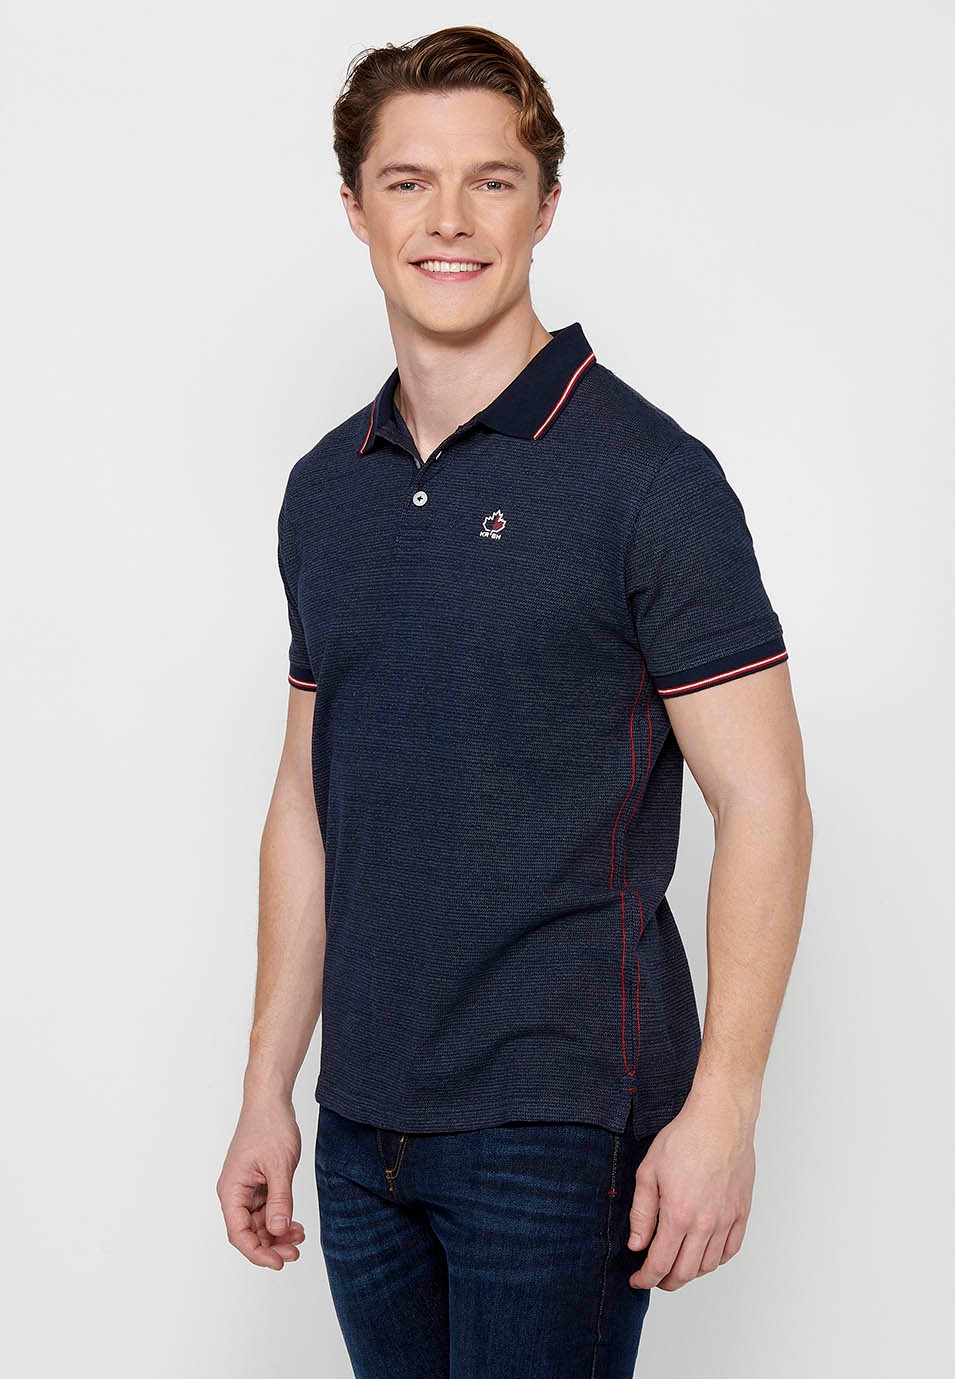 Short-sleeved polo shirt with shirt collar with buttons in Navy Color for Men 1